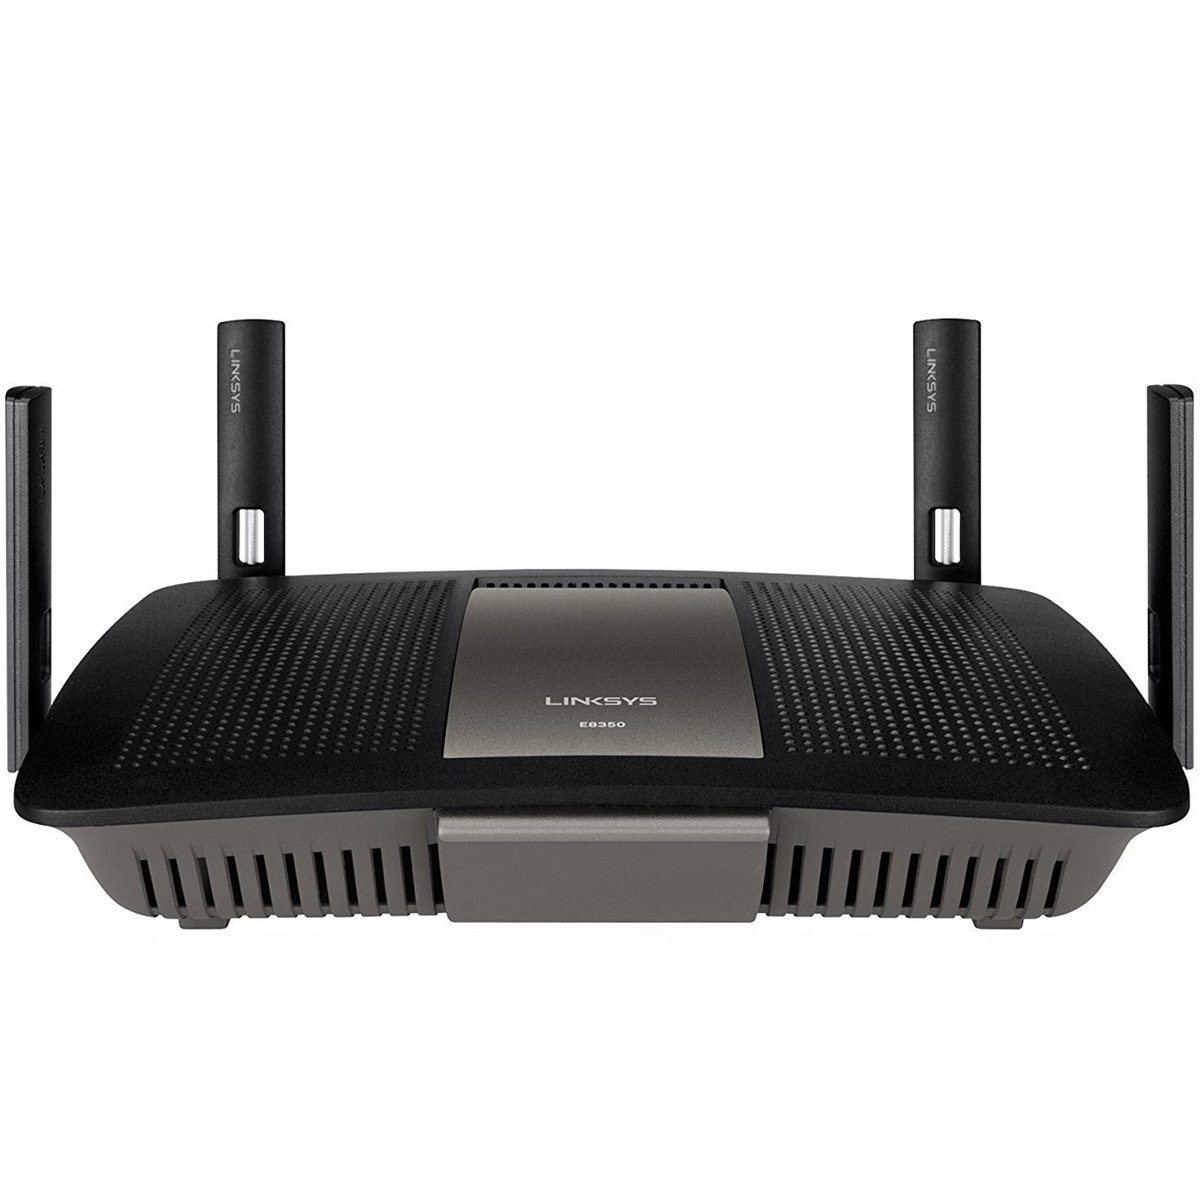 Linksys E8350 AC2400 Broad Band Dual Gigabit Wifi Router with USB Ports